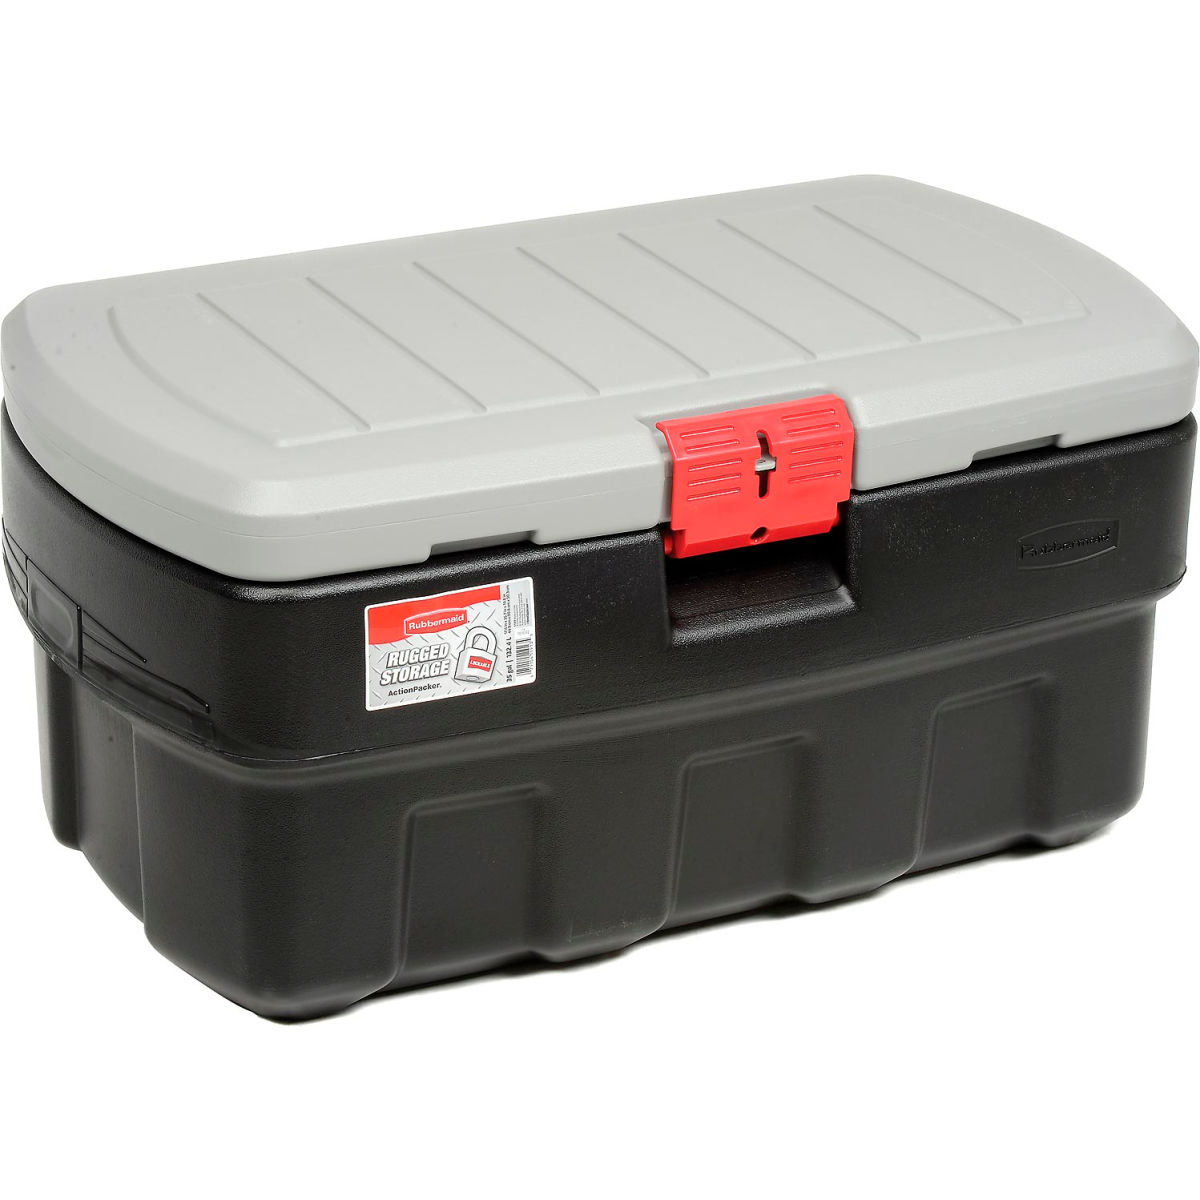 Picture of United Solutions 4134400 35 gal ActionPacker Lockable Storage Box - Black - 32.25 x 20 x 17.25 in.